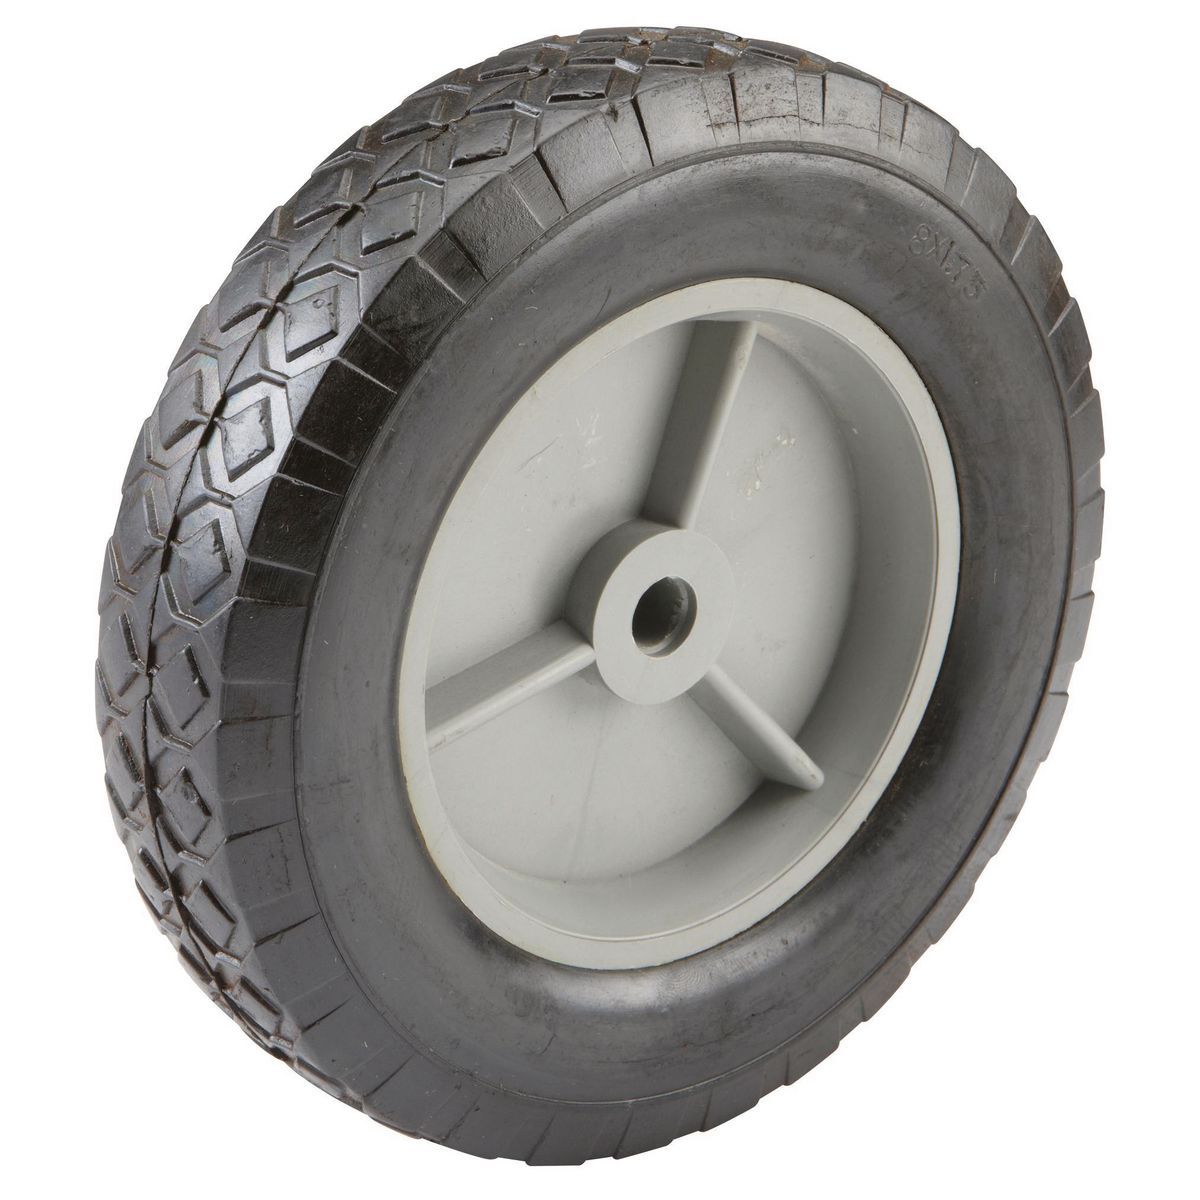 MARTIN WHEEL 8 in. Solid Rubber Tire with PVC Hub